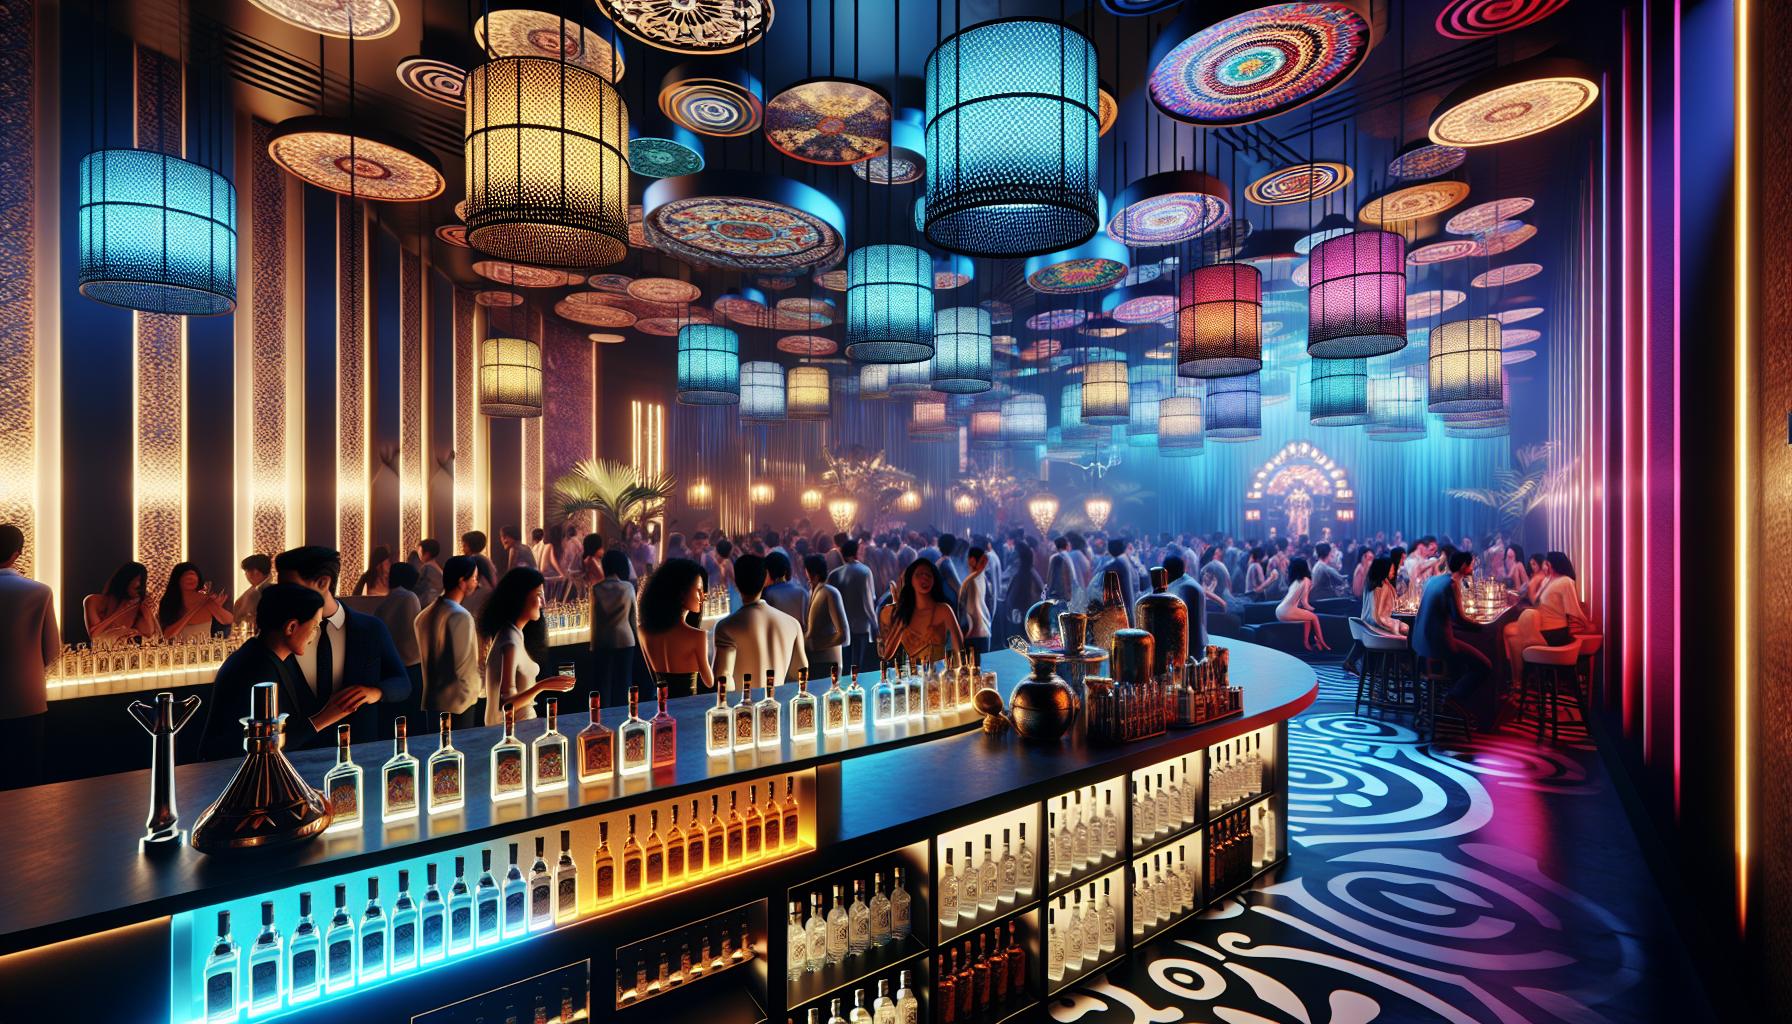 Best Chelsea London Nightclubs for a Sophisticated Night Out?